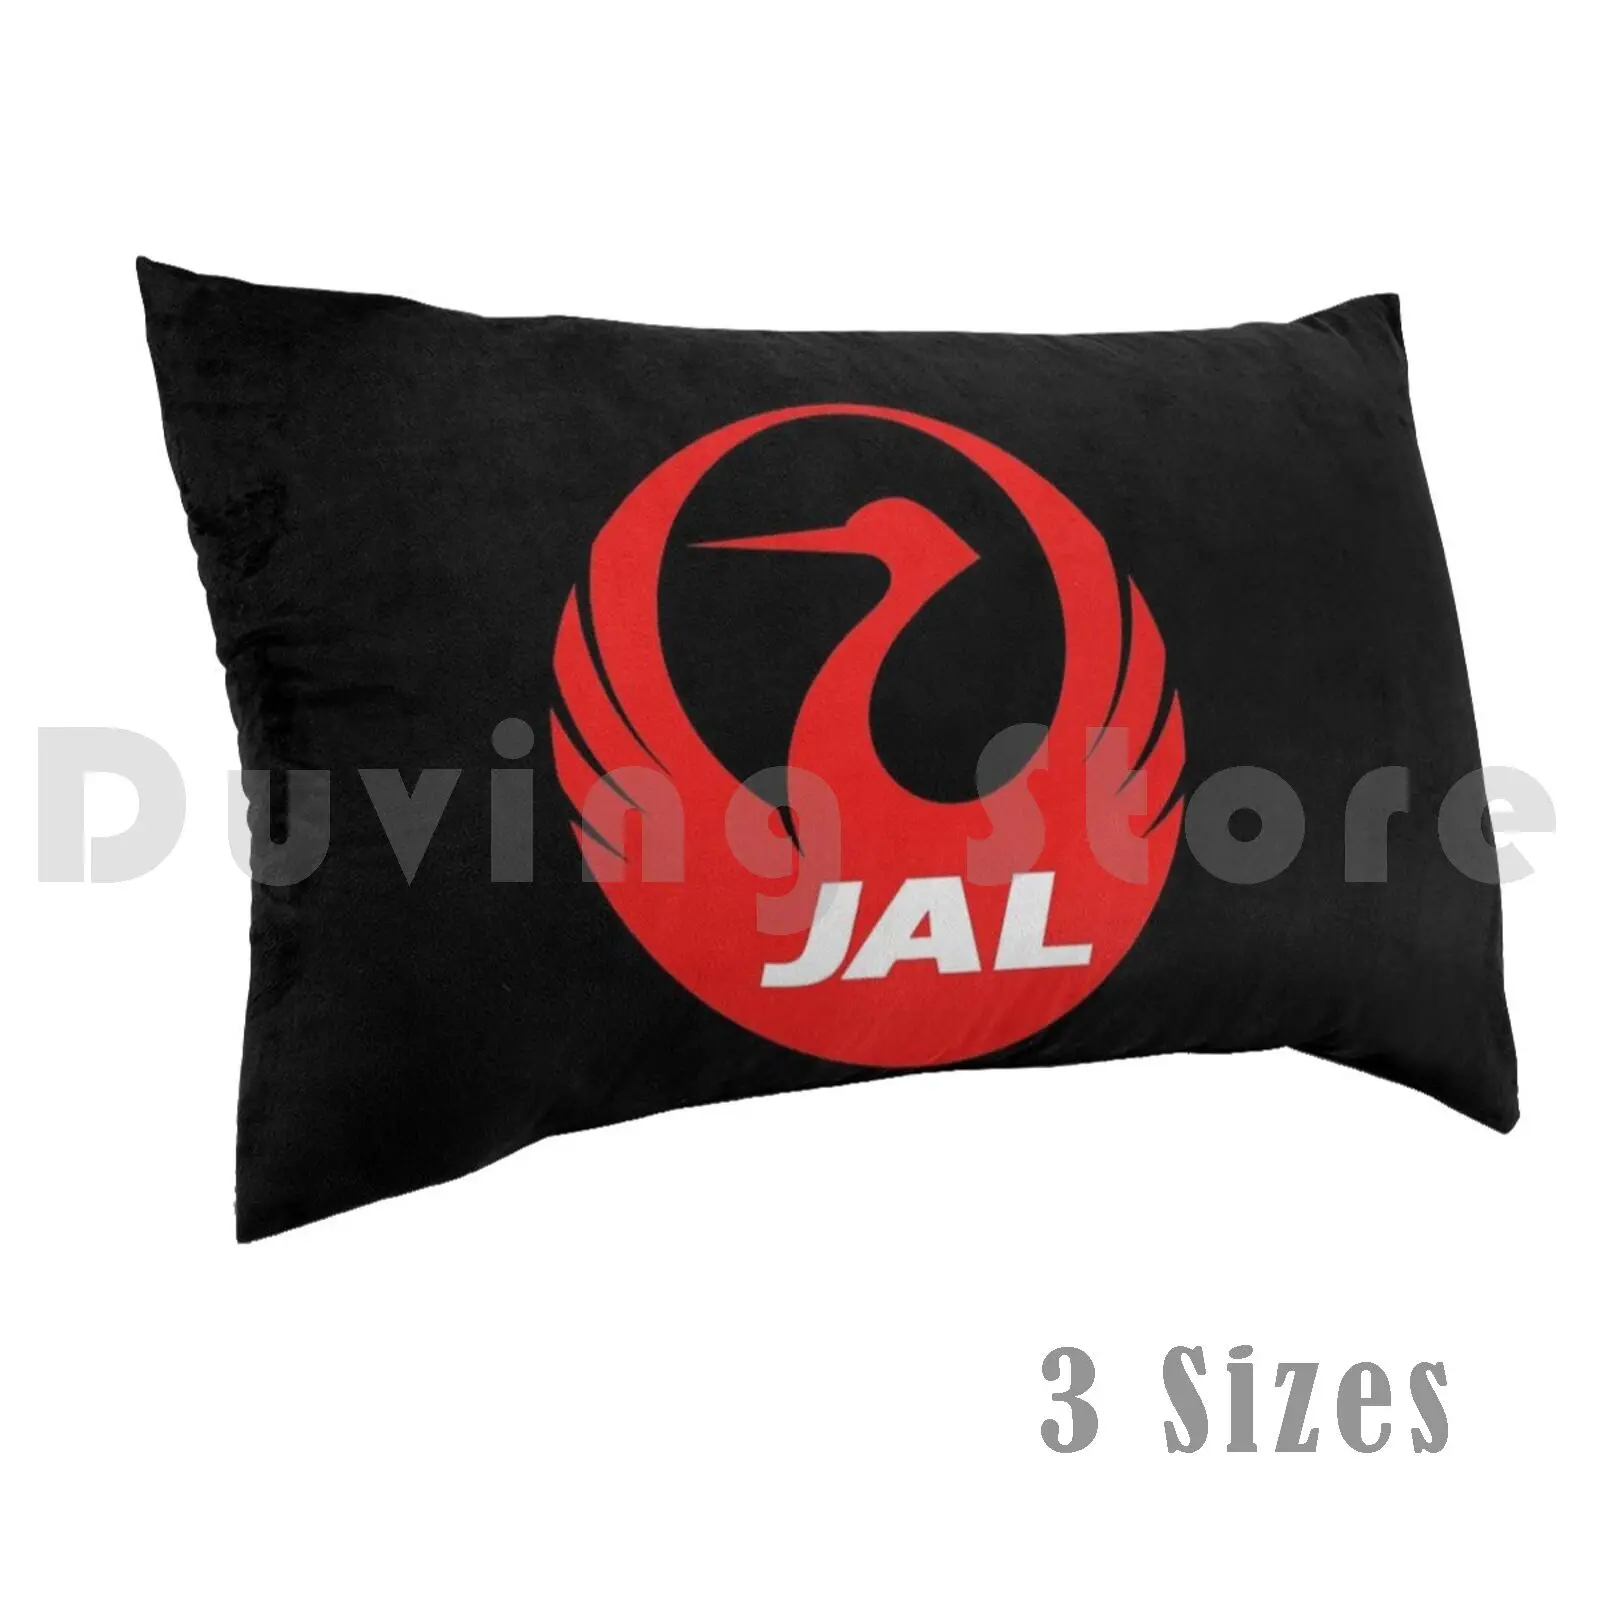 Classic Jal Pillow Case DIY 50x75 Vintage Retro Airplane Company Airways Old Japan Jal